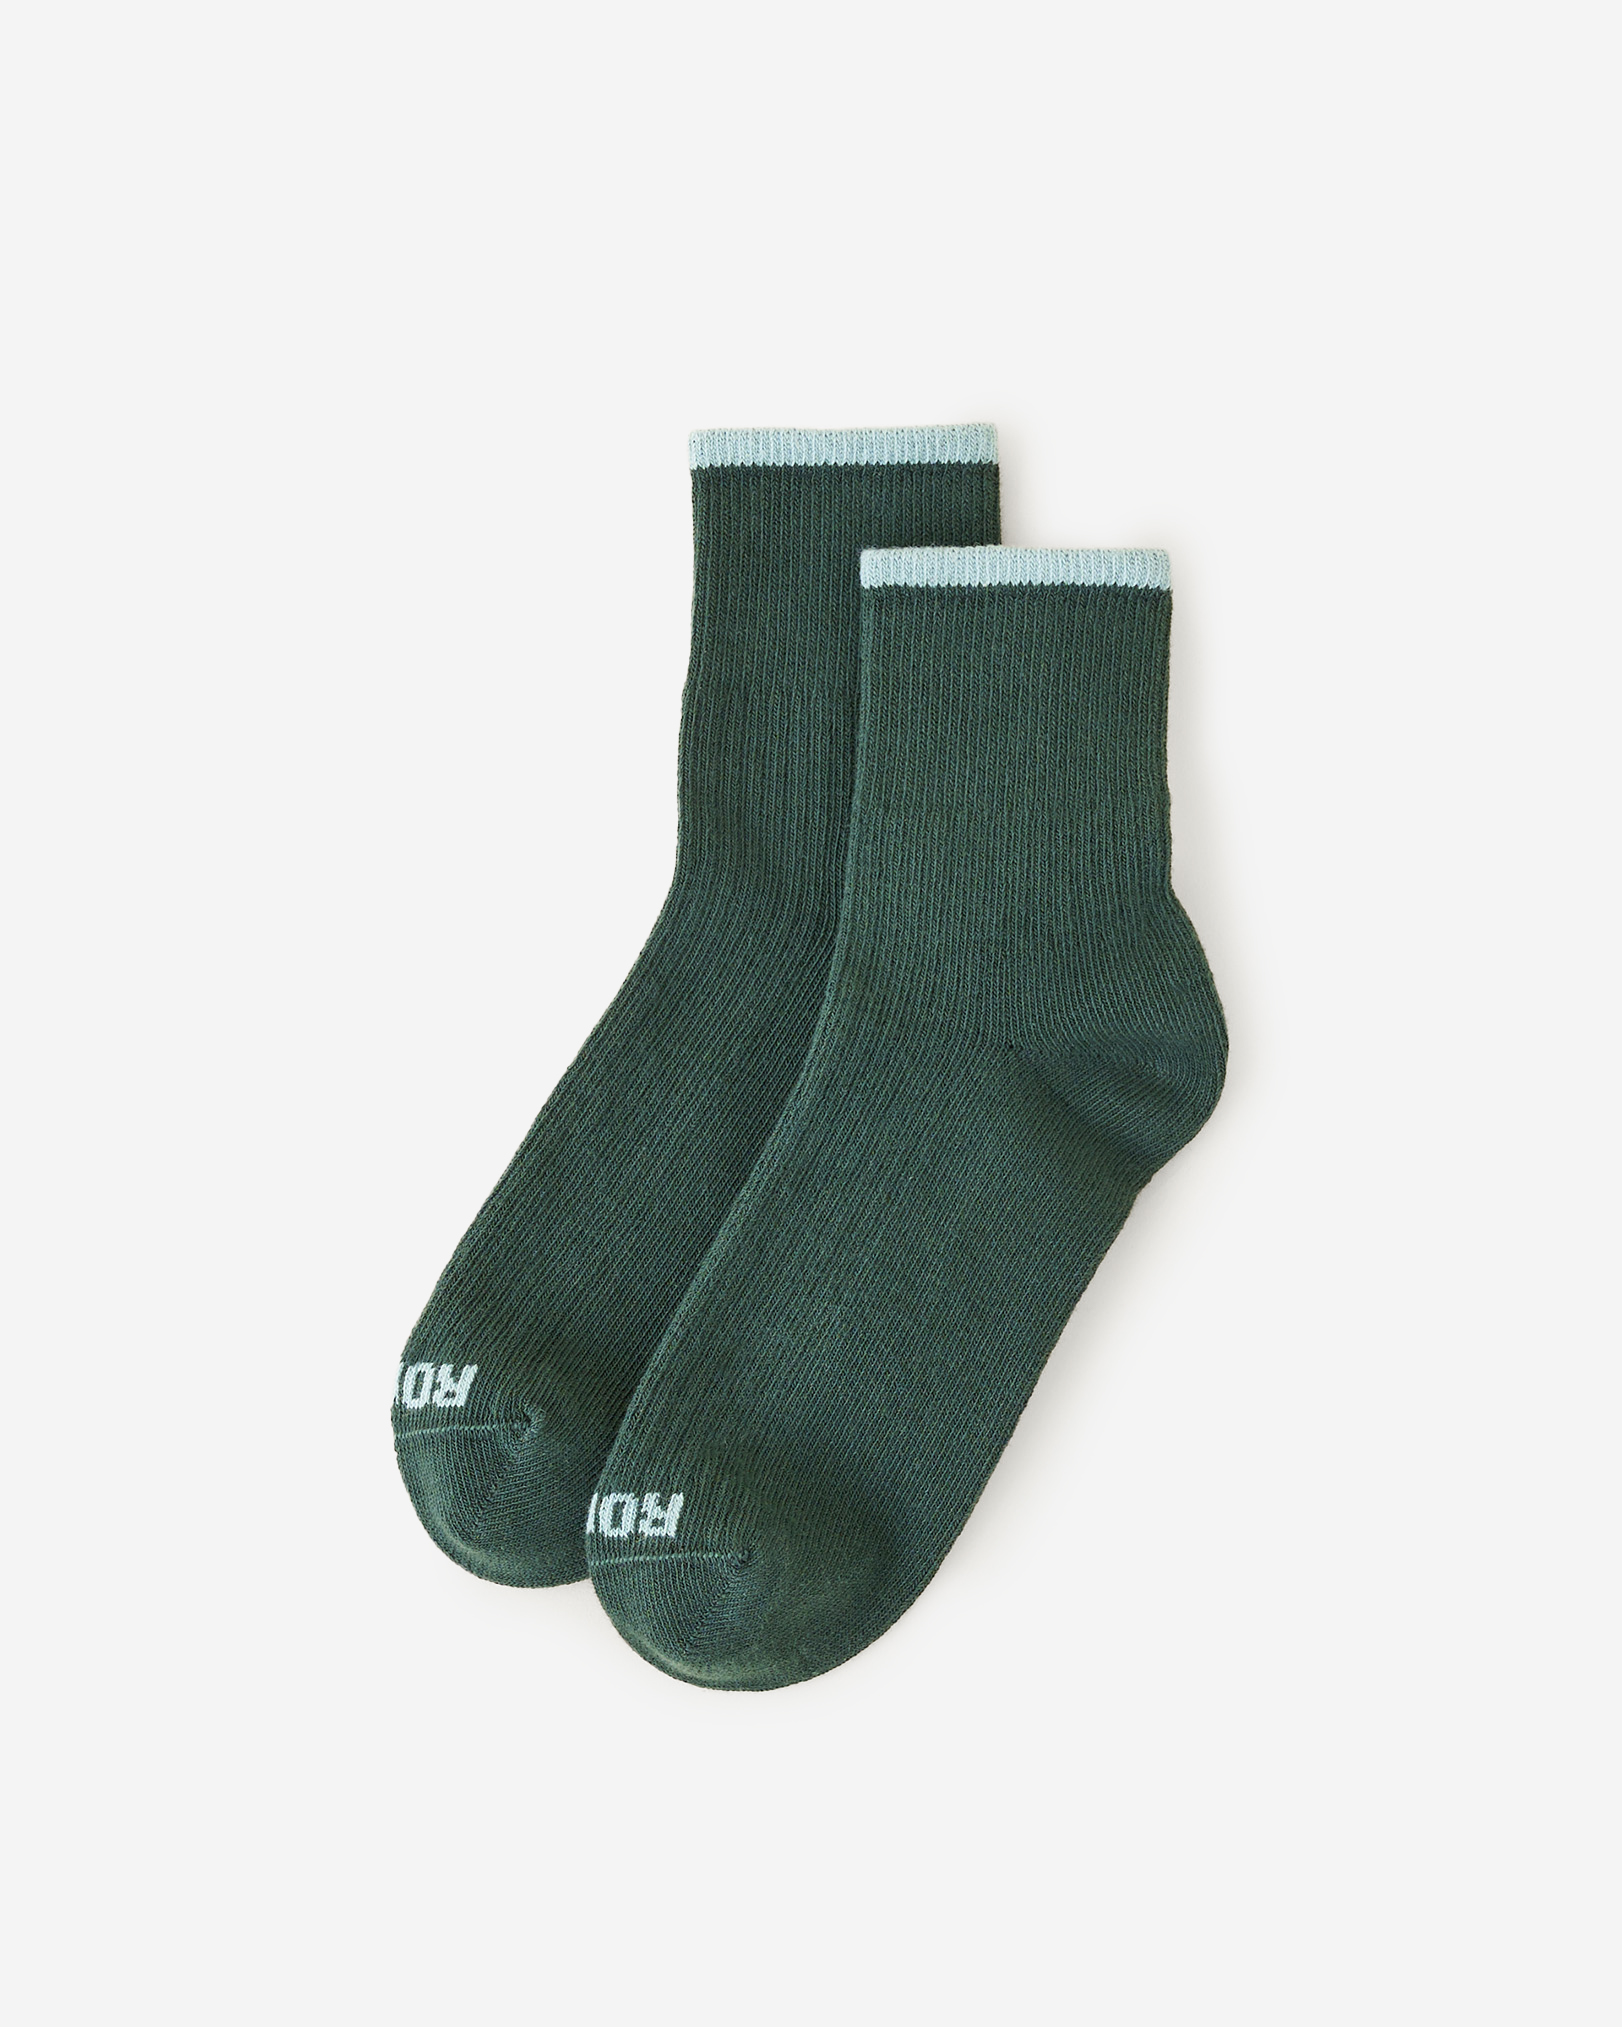 Roots Women's Cotton Ankle Sock in Forest Teal